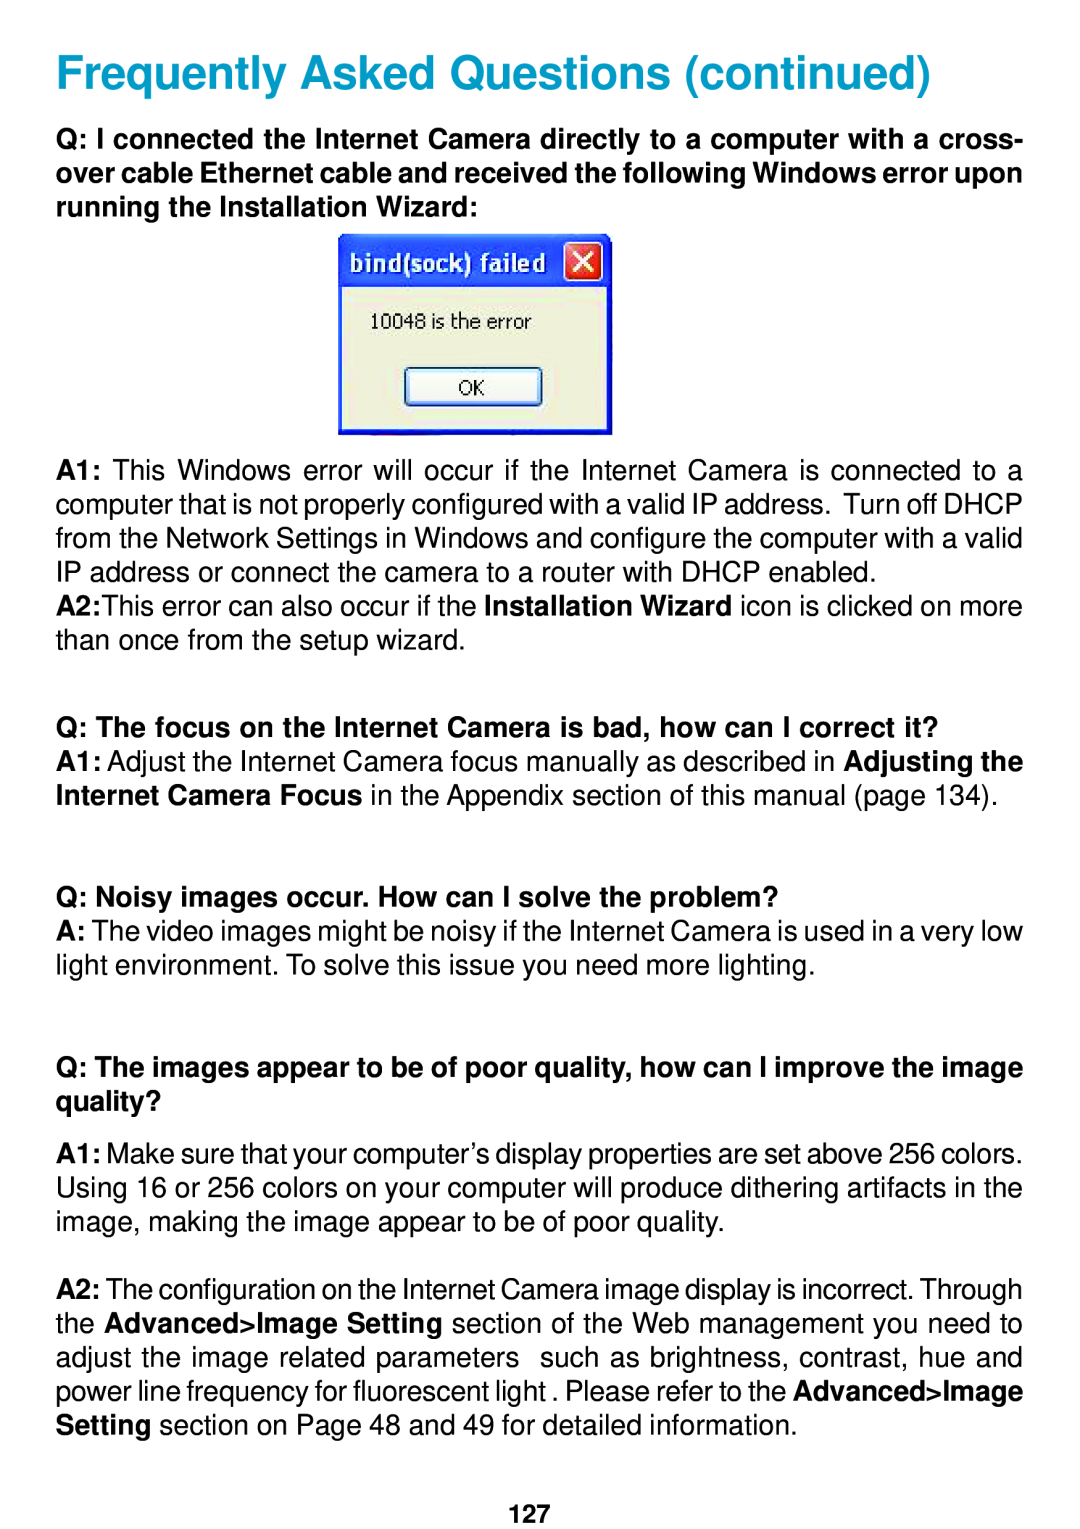 D-Link DCS-5300 Frequently Asked Questions continued, Q The focus on the Internet Camera is bad, how can I correct it? 